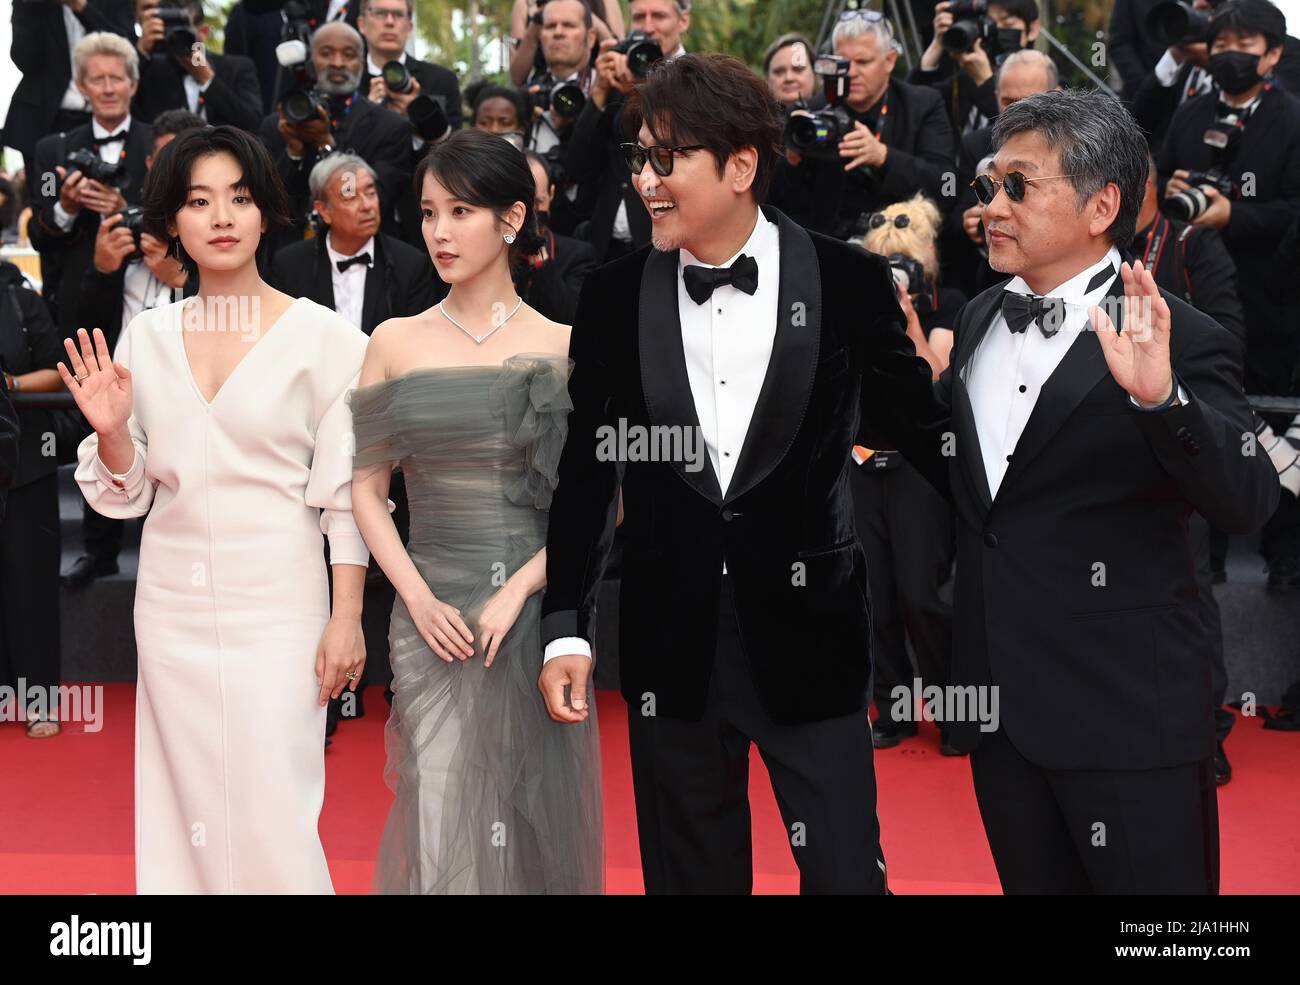 May 26th, 2022. Cannes, France. Lee Joo-Young, Choi Hee-jin, Song Kang-ho and Hirokazu Koreeda attending the Broker Premiere, part of the 75th Cannes Film Festival, Palais de Festival, Cannes. Credit: Doug Peters/EMPICS/Alamy Live News Stock Photo